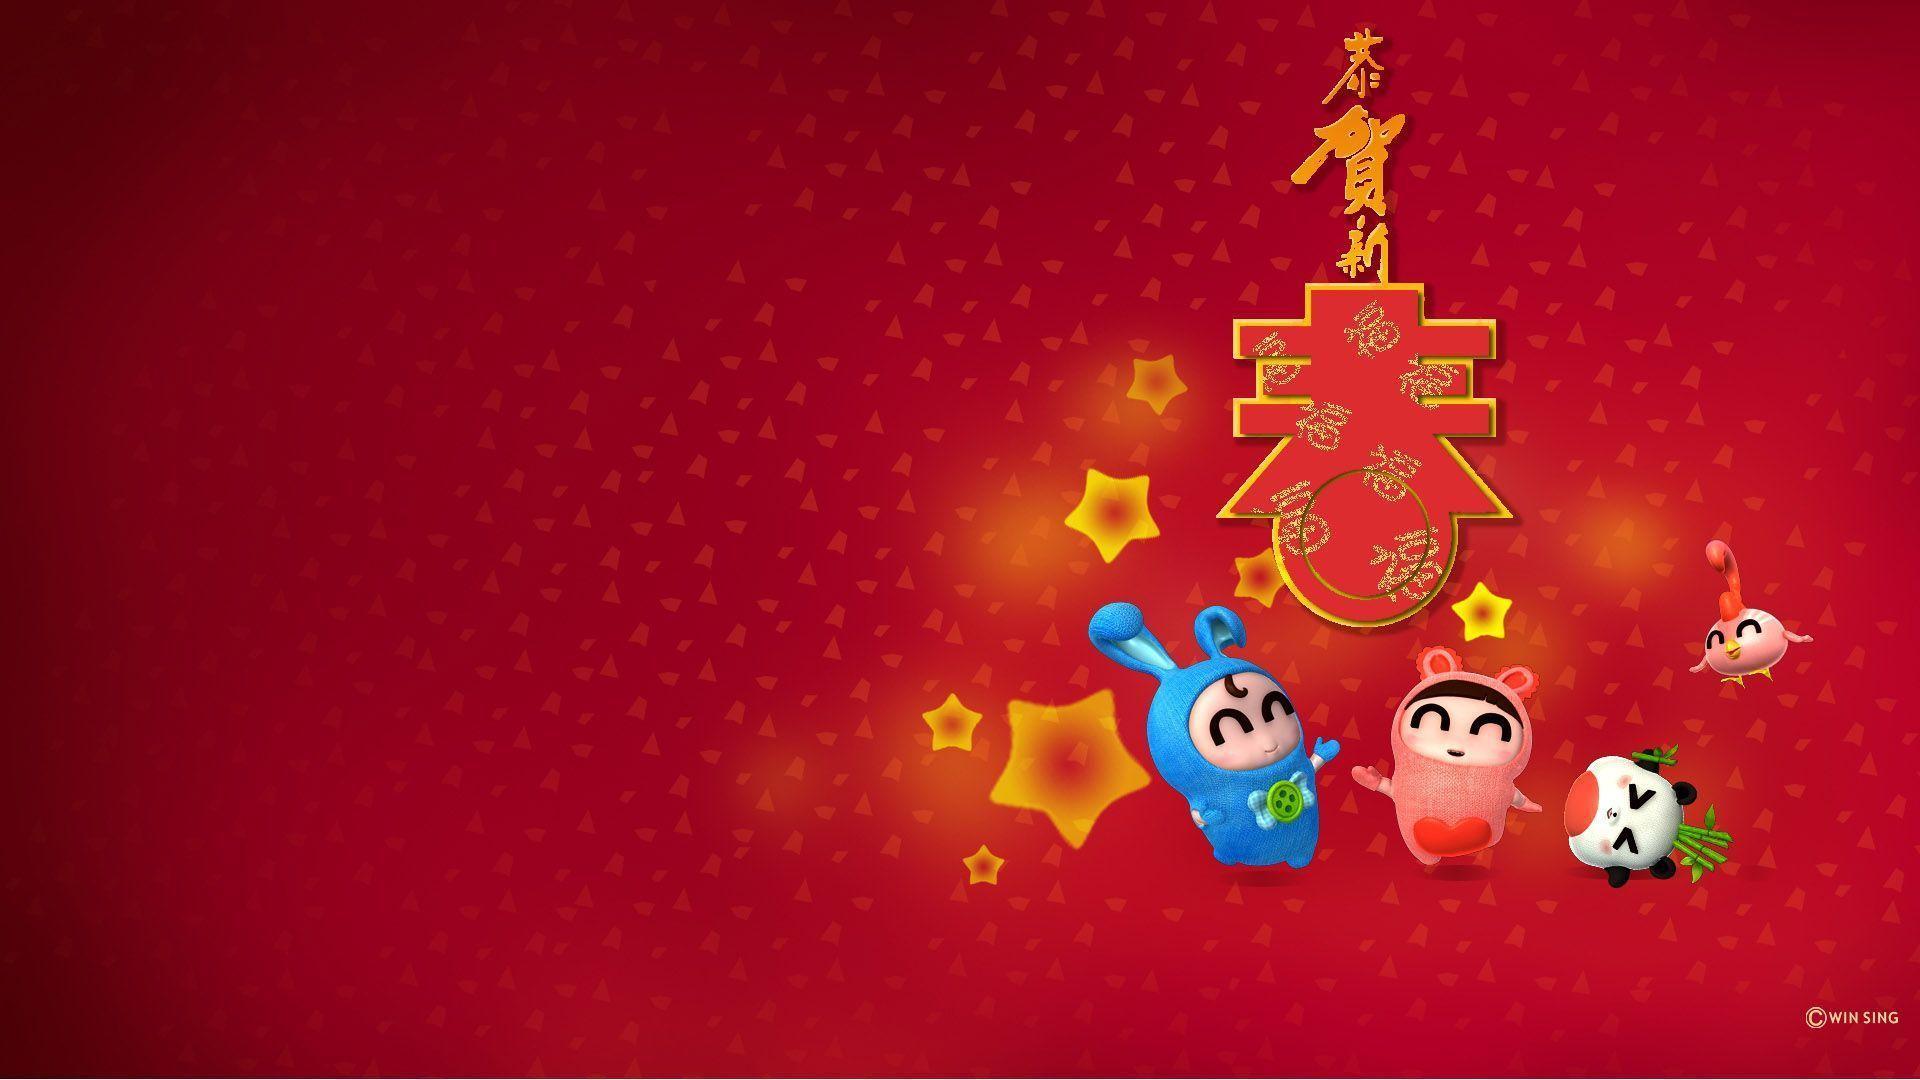 Wallpaper For > Chinese New Year Wallpaper Free Download